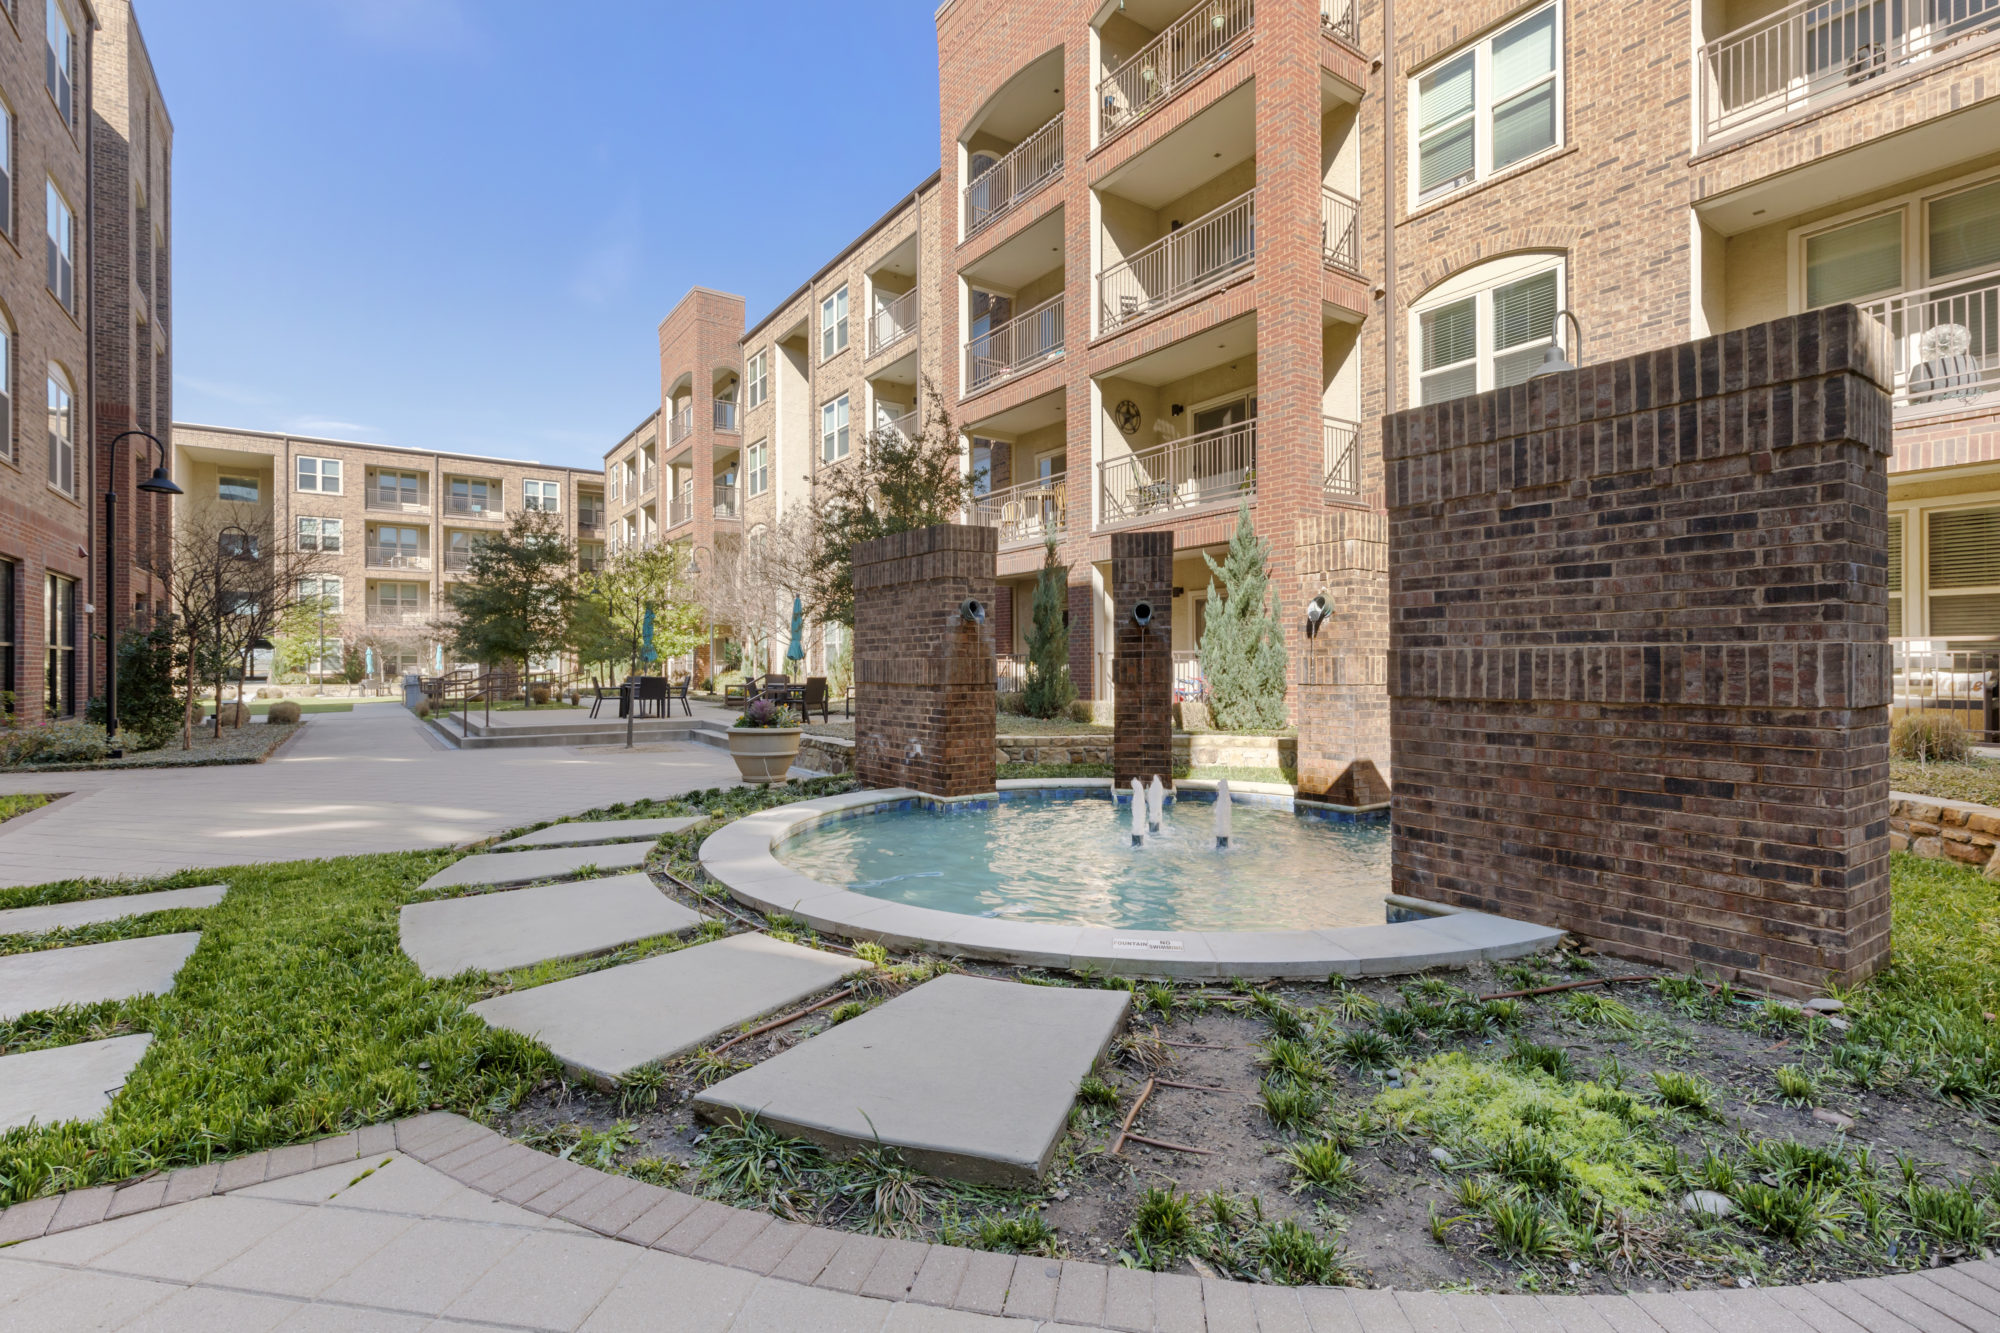 Features And Amenities Bell Frisco Market Center Apartments